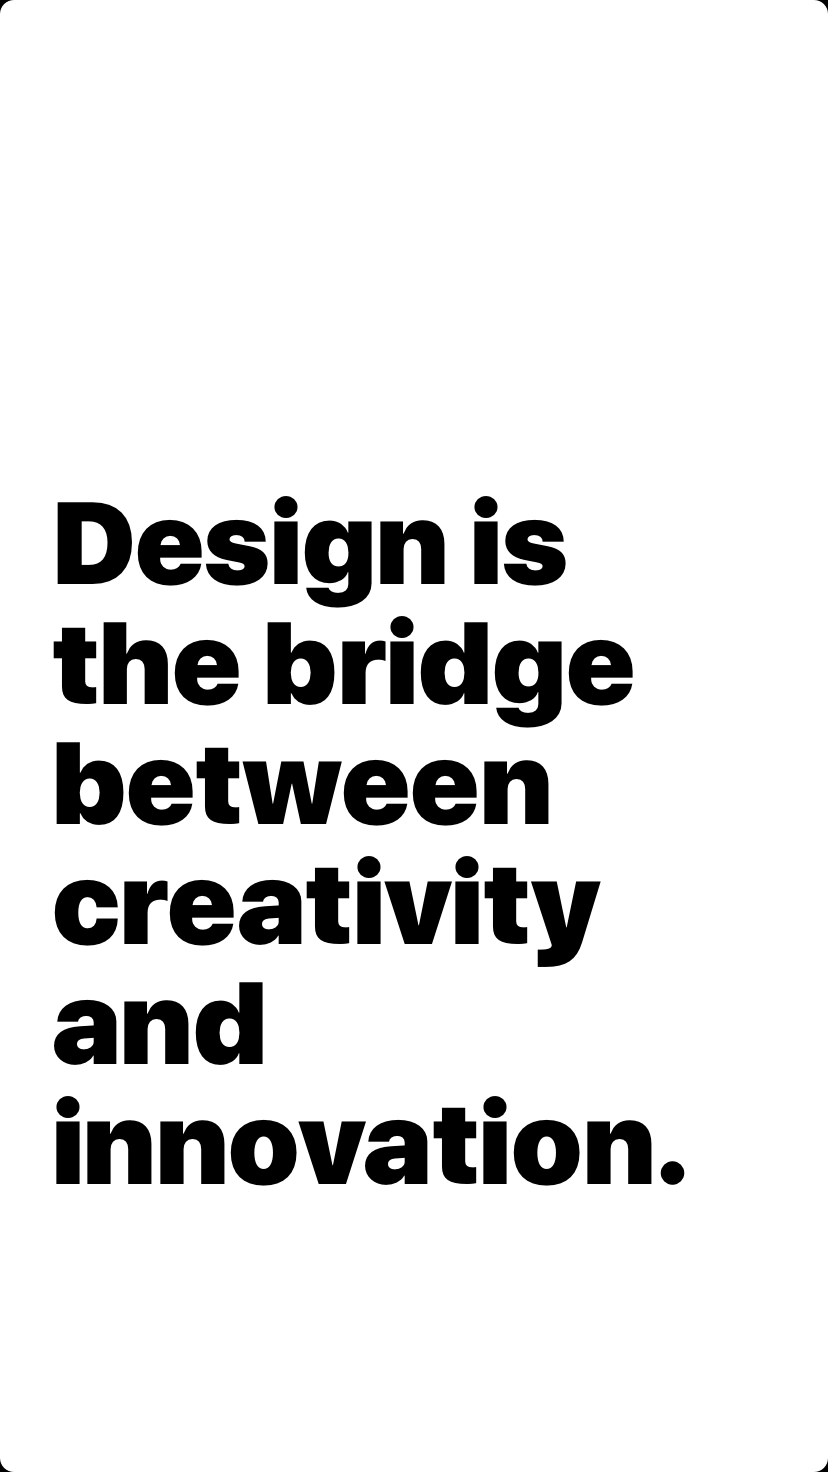 Design is the bridge between creativity and innovation.